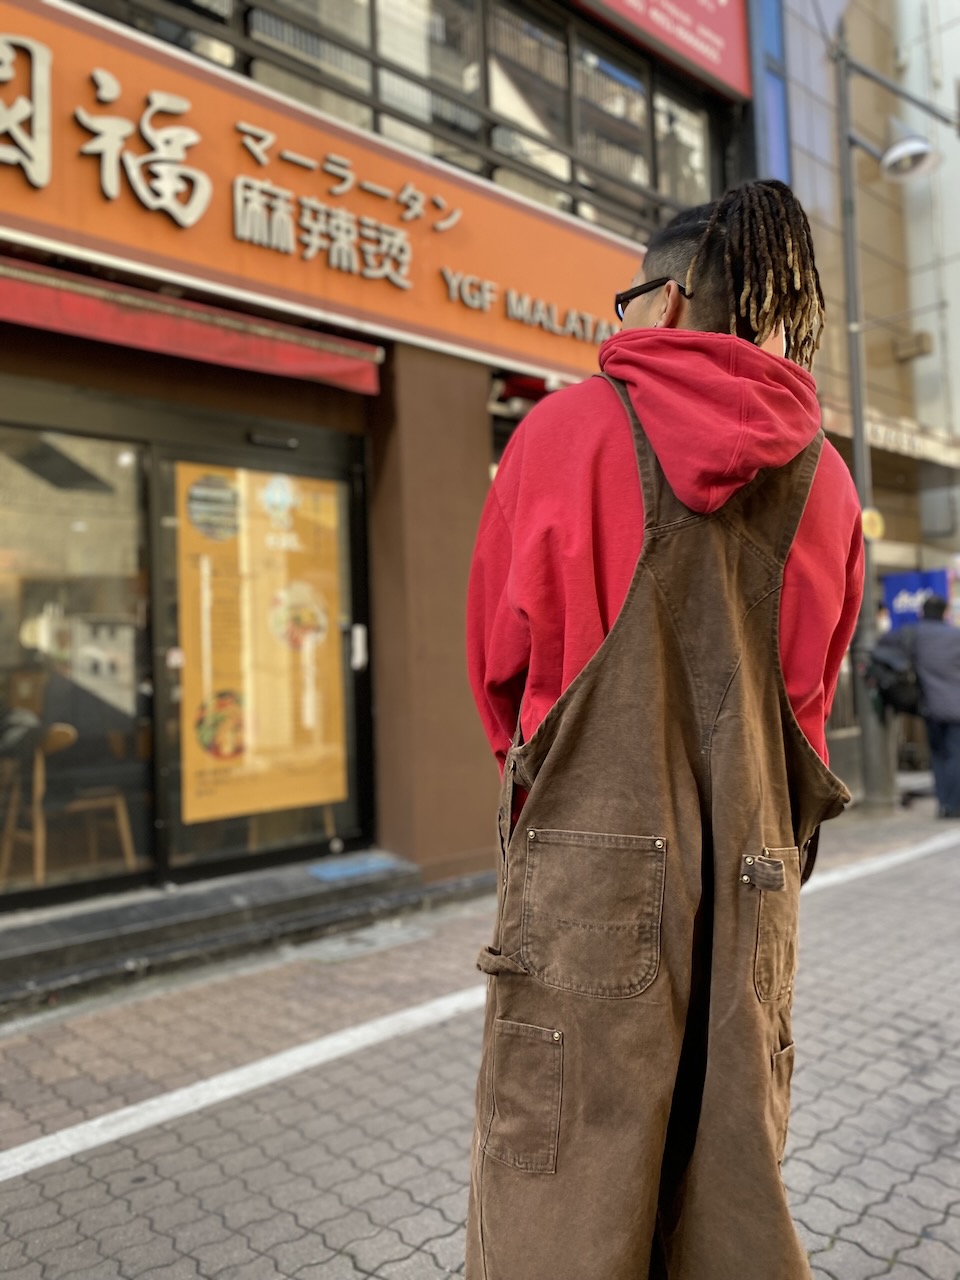 Cheeze Looker - #LookerStreetatHome Name: Nattakorn Sangawong Occupation:  Barista IG: @ducky0000 Hat: Filson Suspenders: Carhartt Pants: From France  Shoes: Red Wing #LookerStreetatHome #StreetStyleatHome #StreetStylefromHome  #FashionFromHome